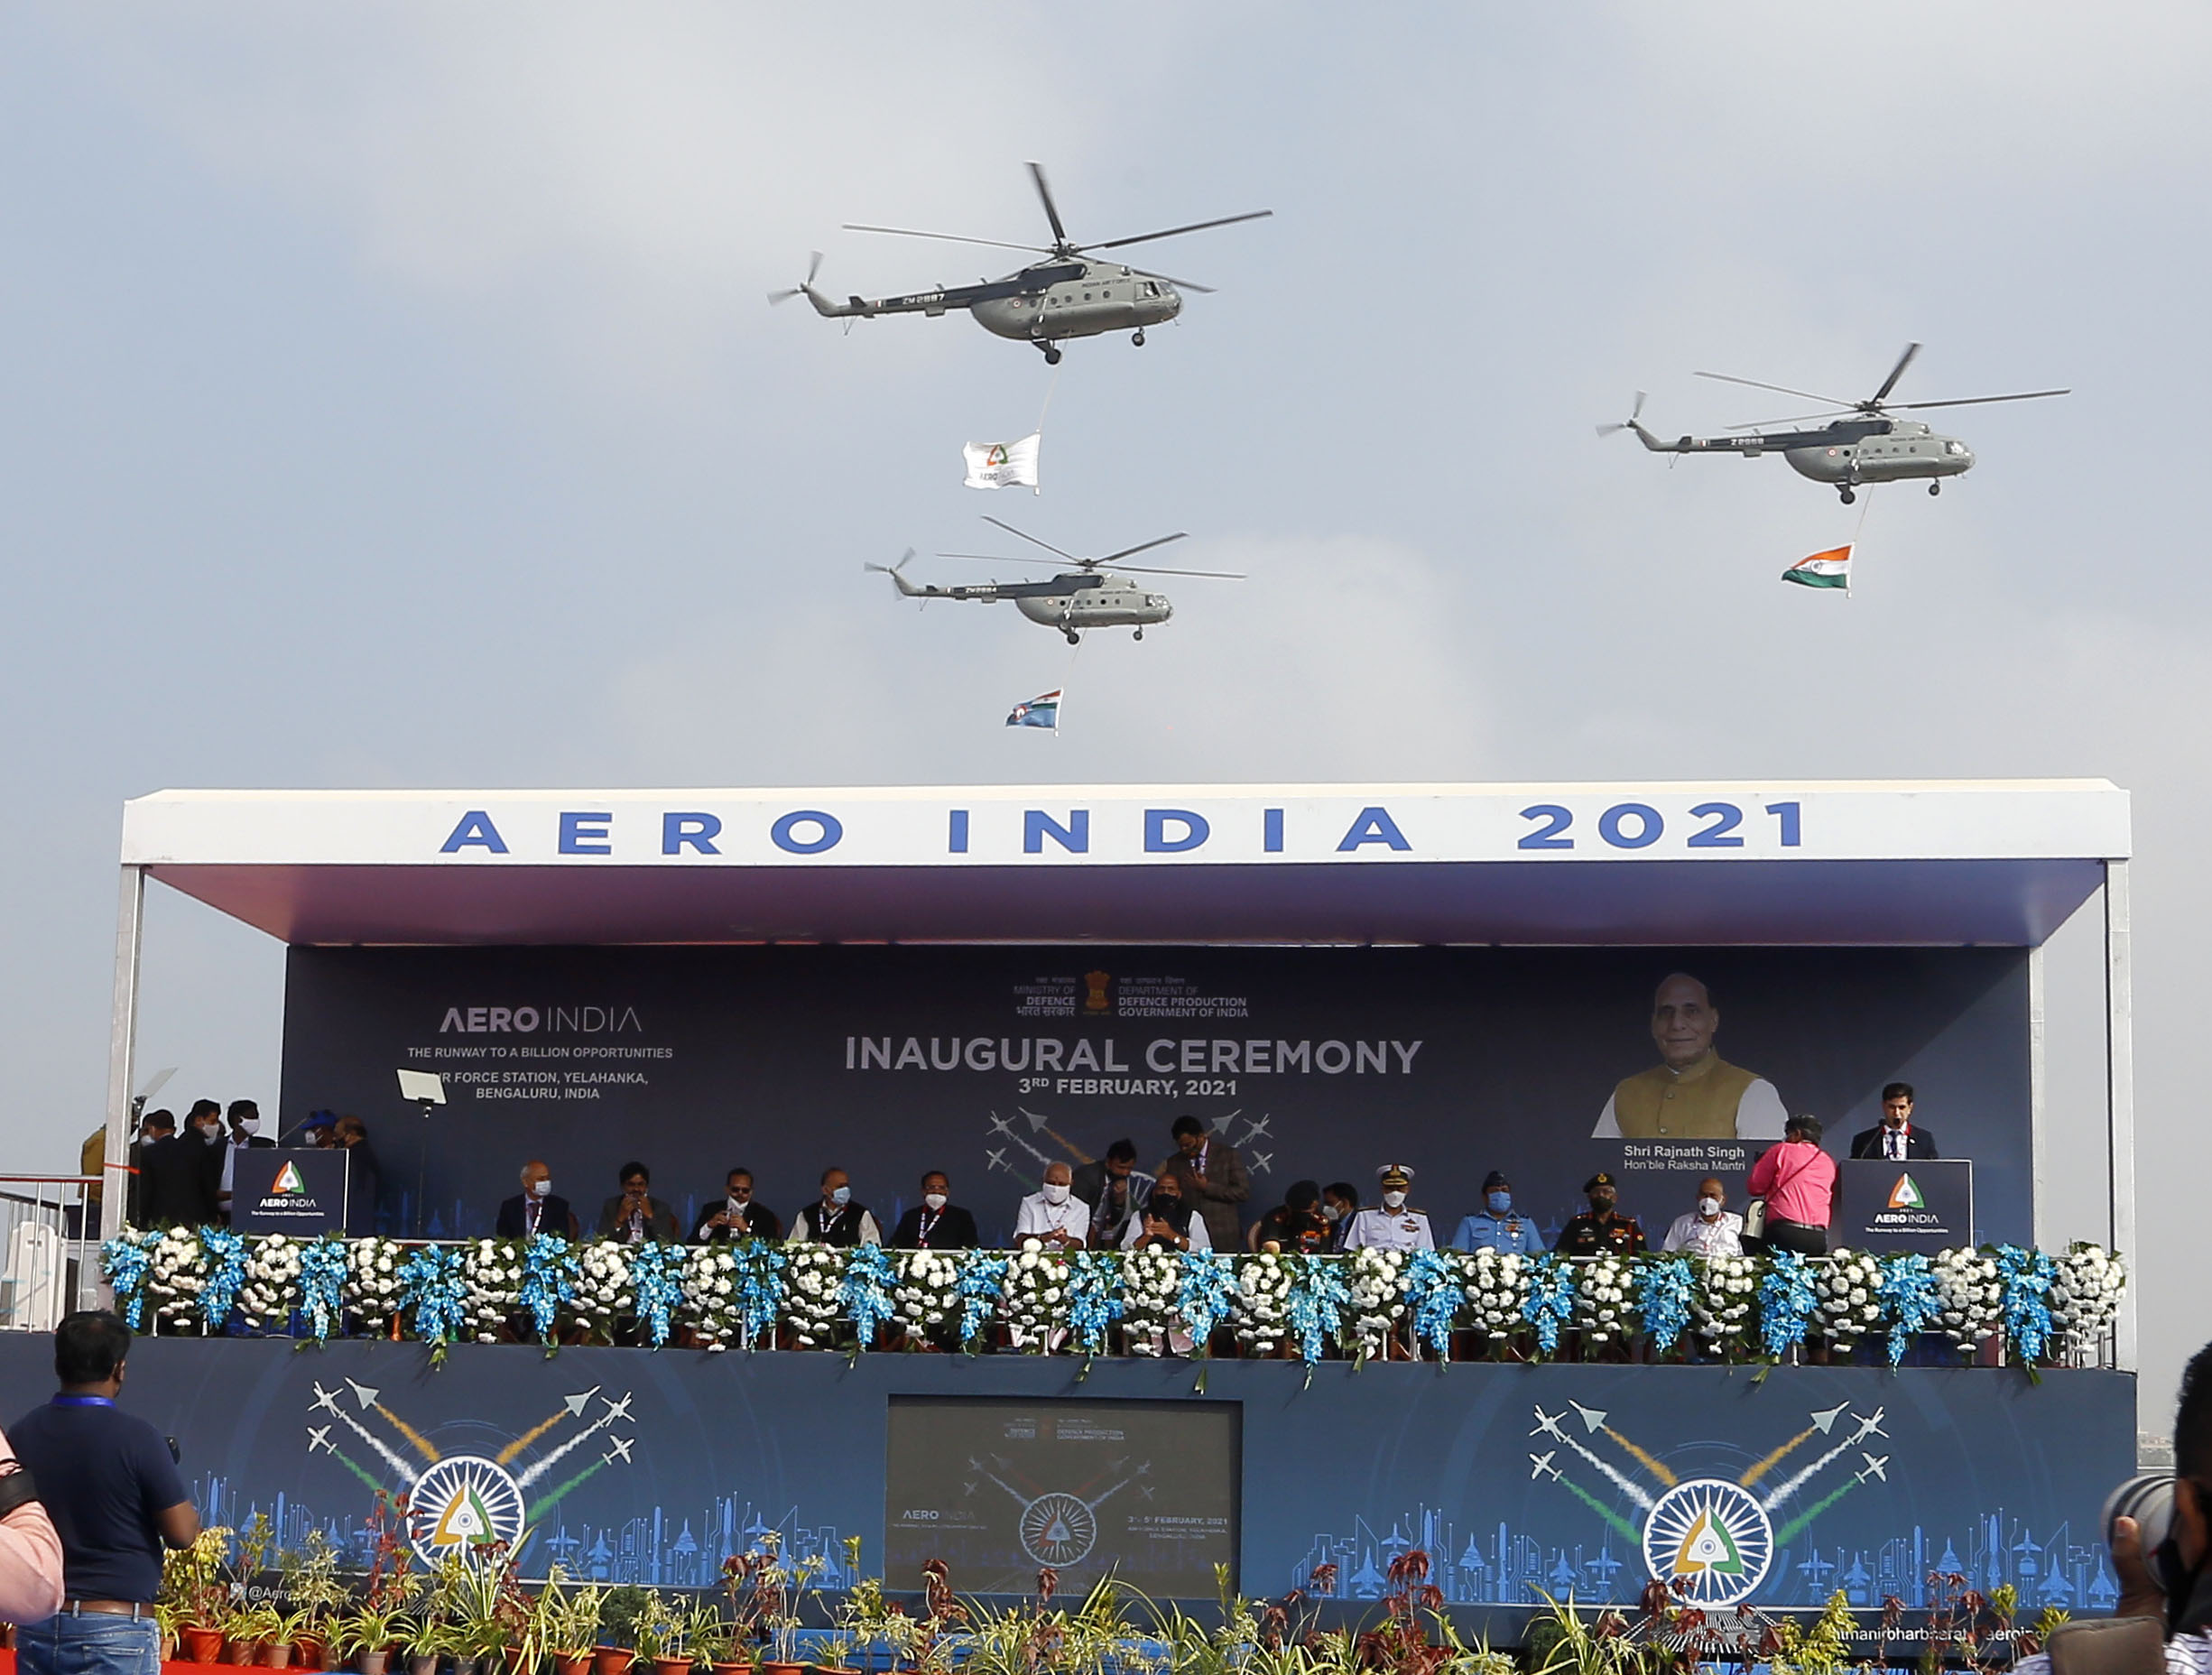 The Union Minister for Defence, Shri Rajnath Singh inaugurates the biennial air show, Aero India 2021, at the Air Force Station, Yelahanka, in Bengaluru on February 03, 2021.	The Union Minister for Chemicals and Fertilizers, Shri D.V. Sadananda Gowda, the Chief Minister of Karnataka, Shri B.S. Yediyurappa, the Chief of Defence Staff (CDS), General Bipin Rawat and other dignitaries are also seen.